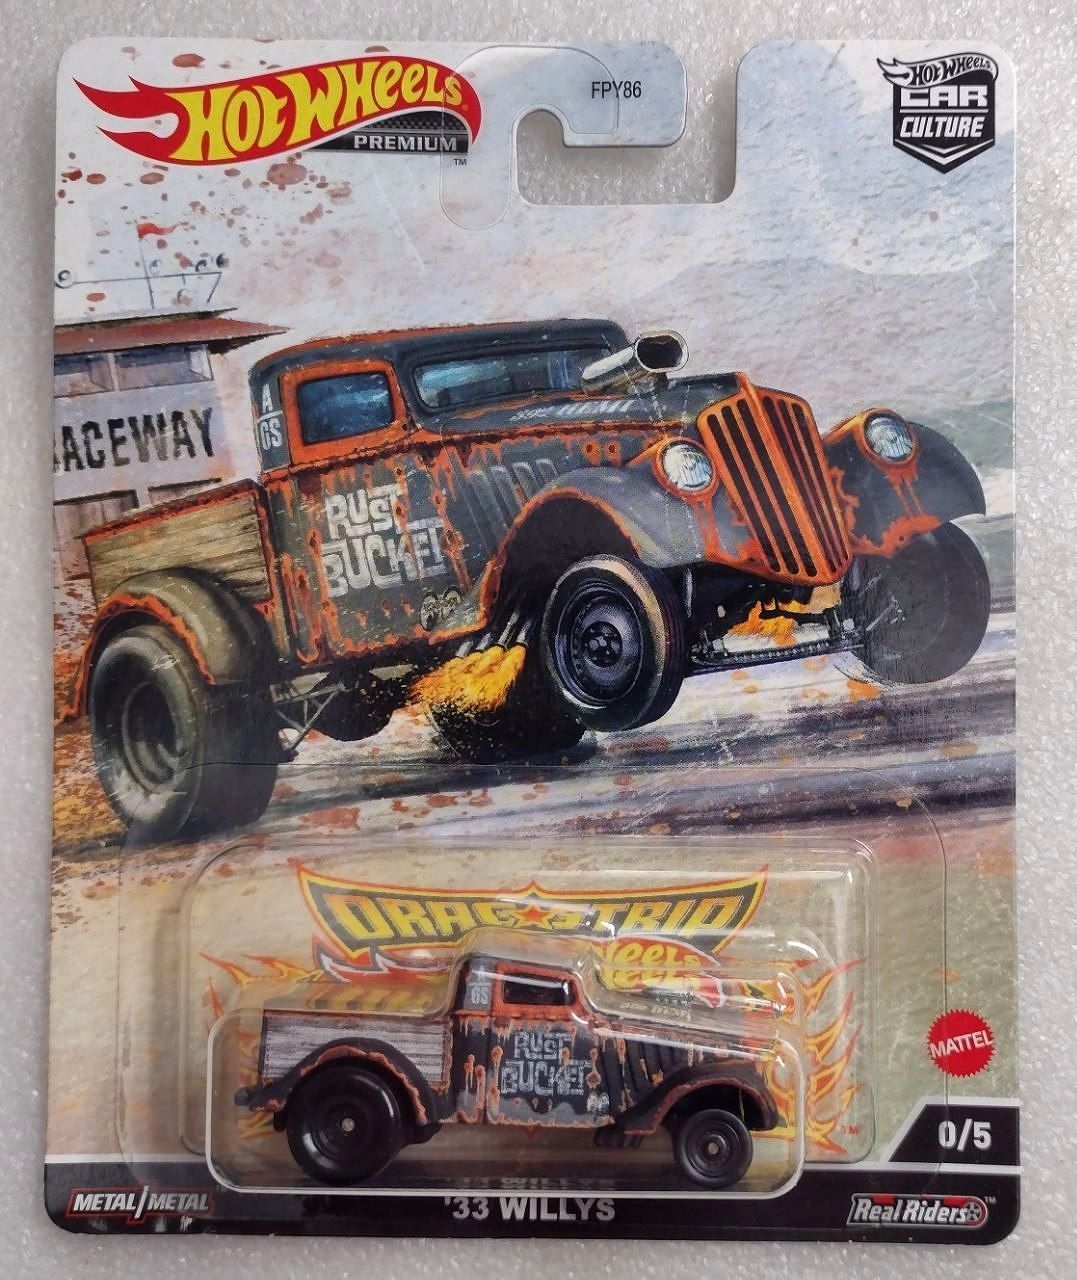 Hot Wheels Premium Car Culture 33 Willys Chase#id23